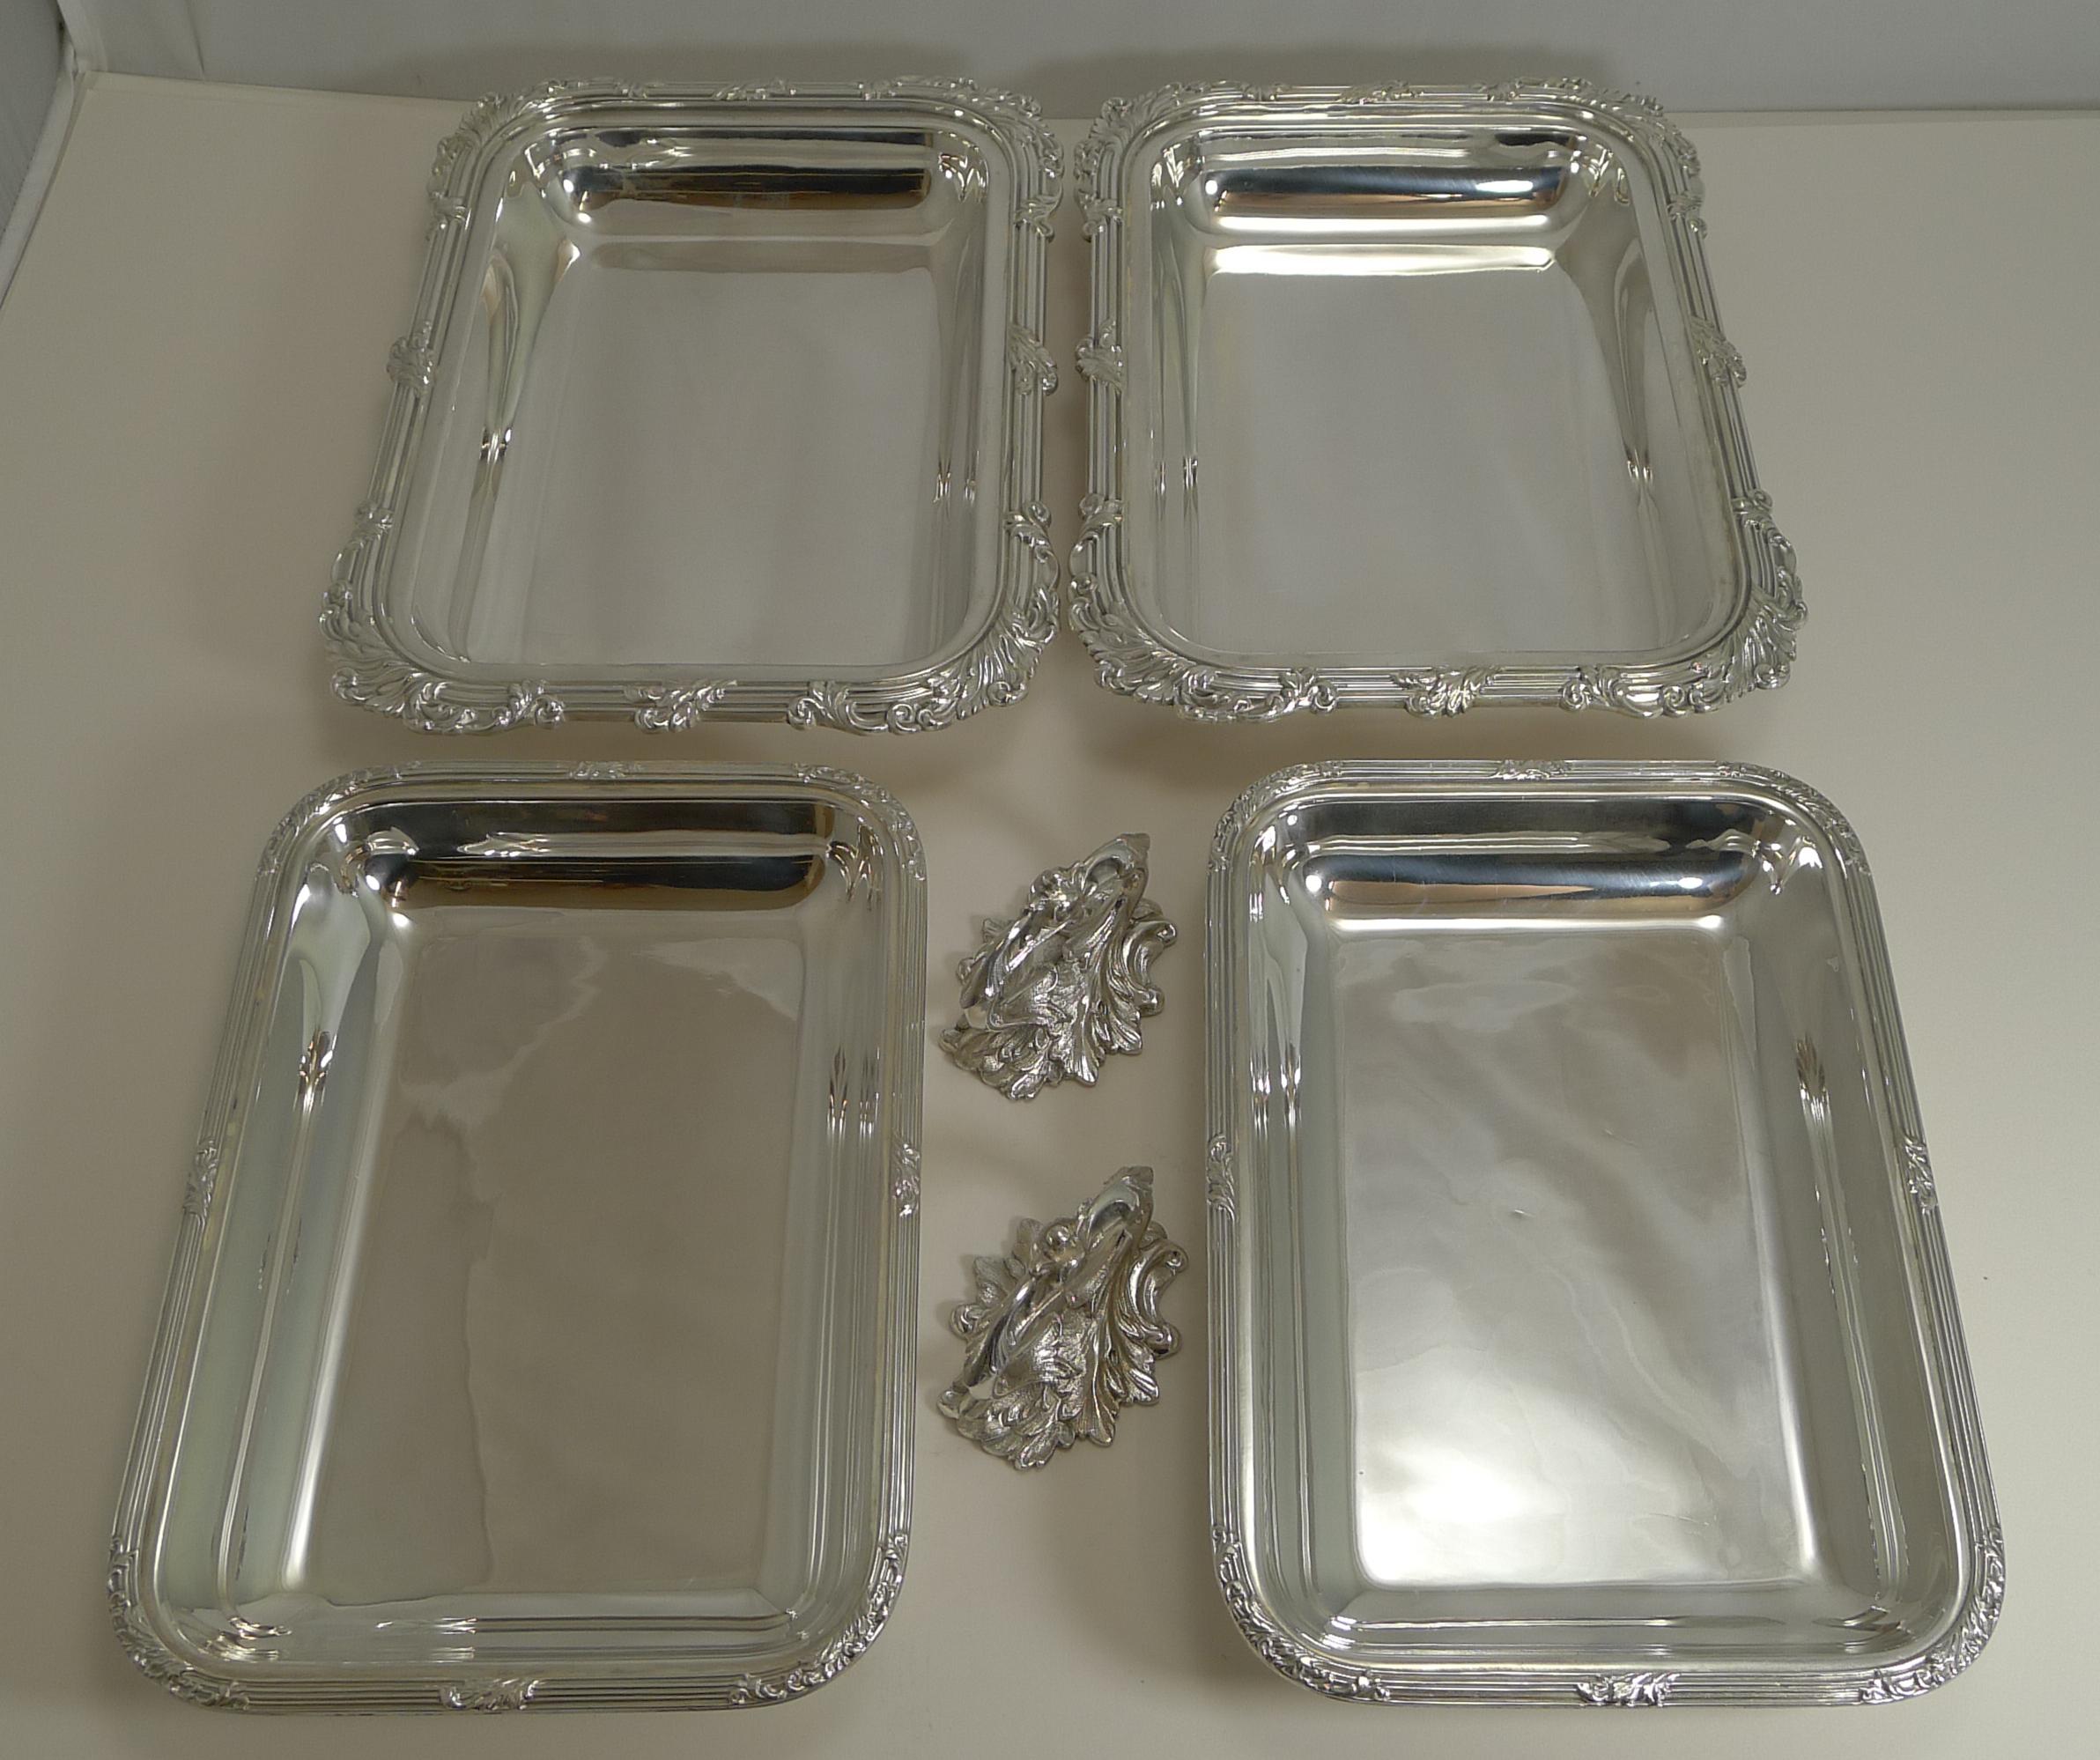 A lovely pair of Victorian entree dishes, made from silver plate by the well renowned silversmith, James Dixon & Sons and dating to the late Victorian era, circa 1890.

The removable handles allow for easy storage and also the lids to be turned